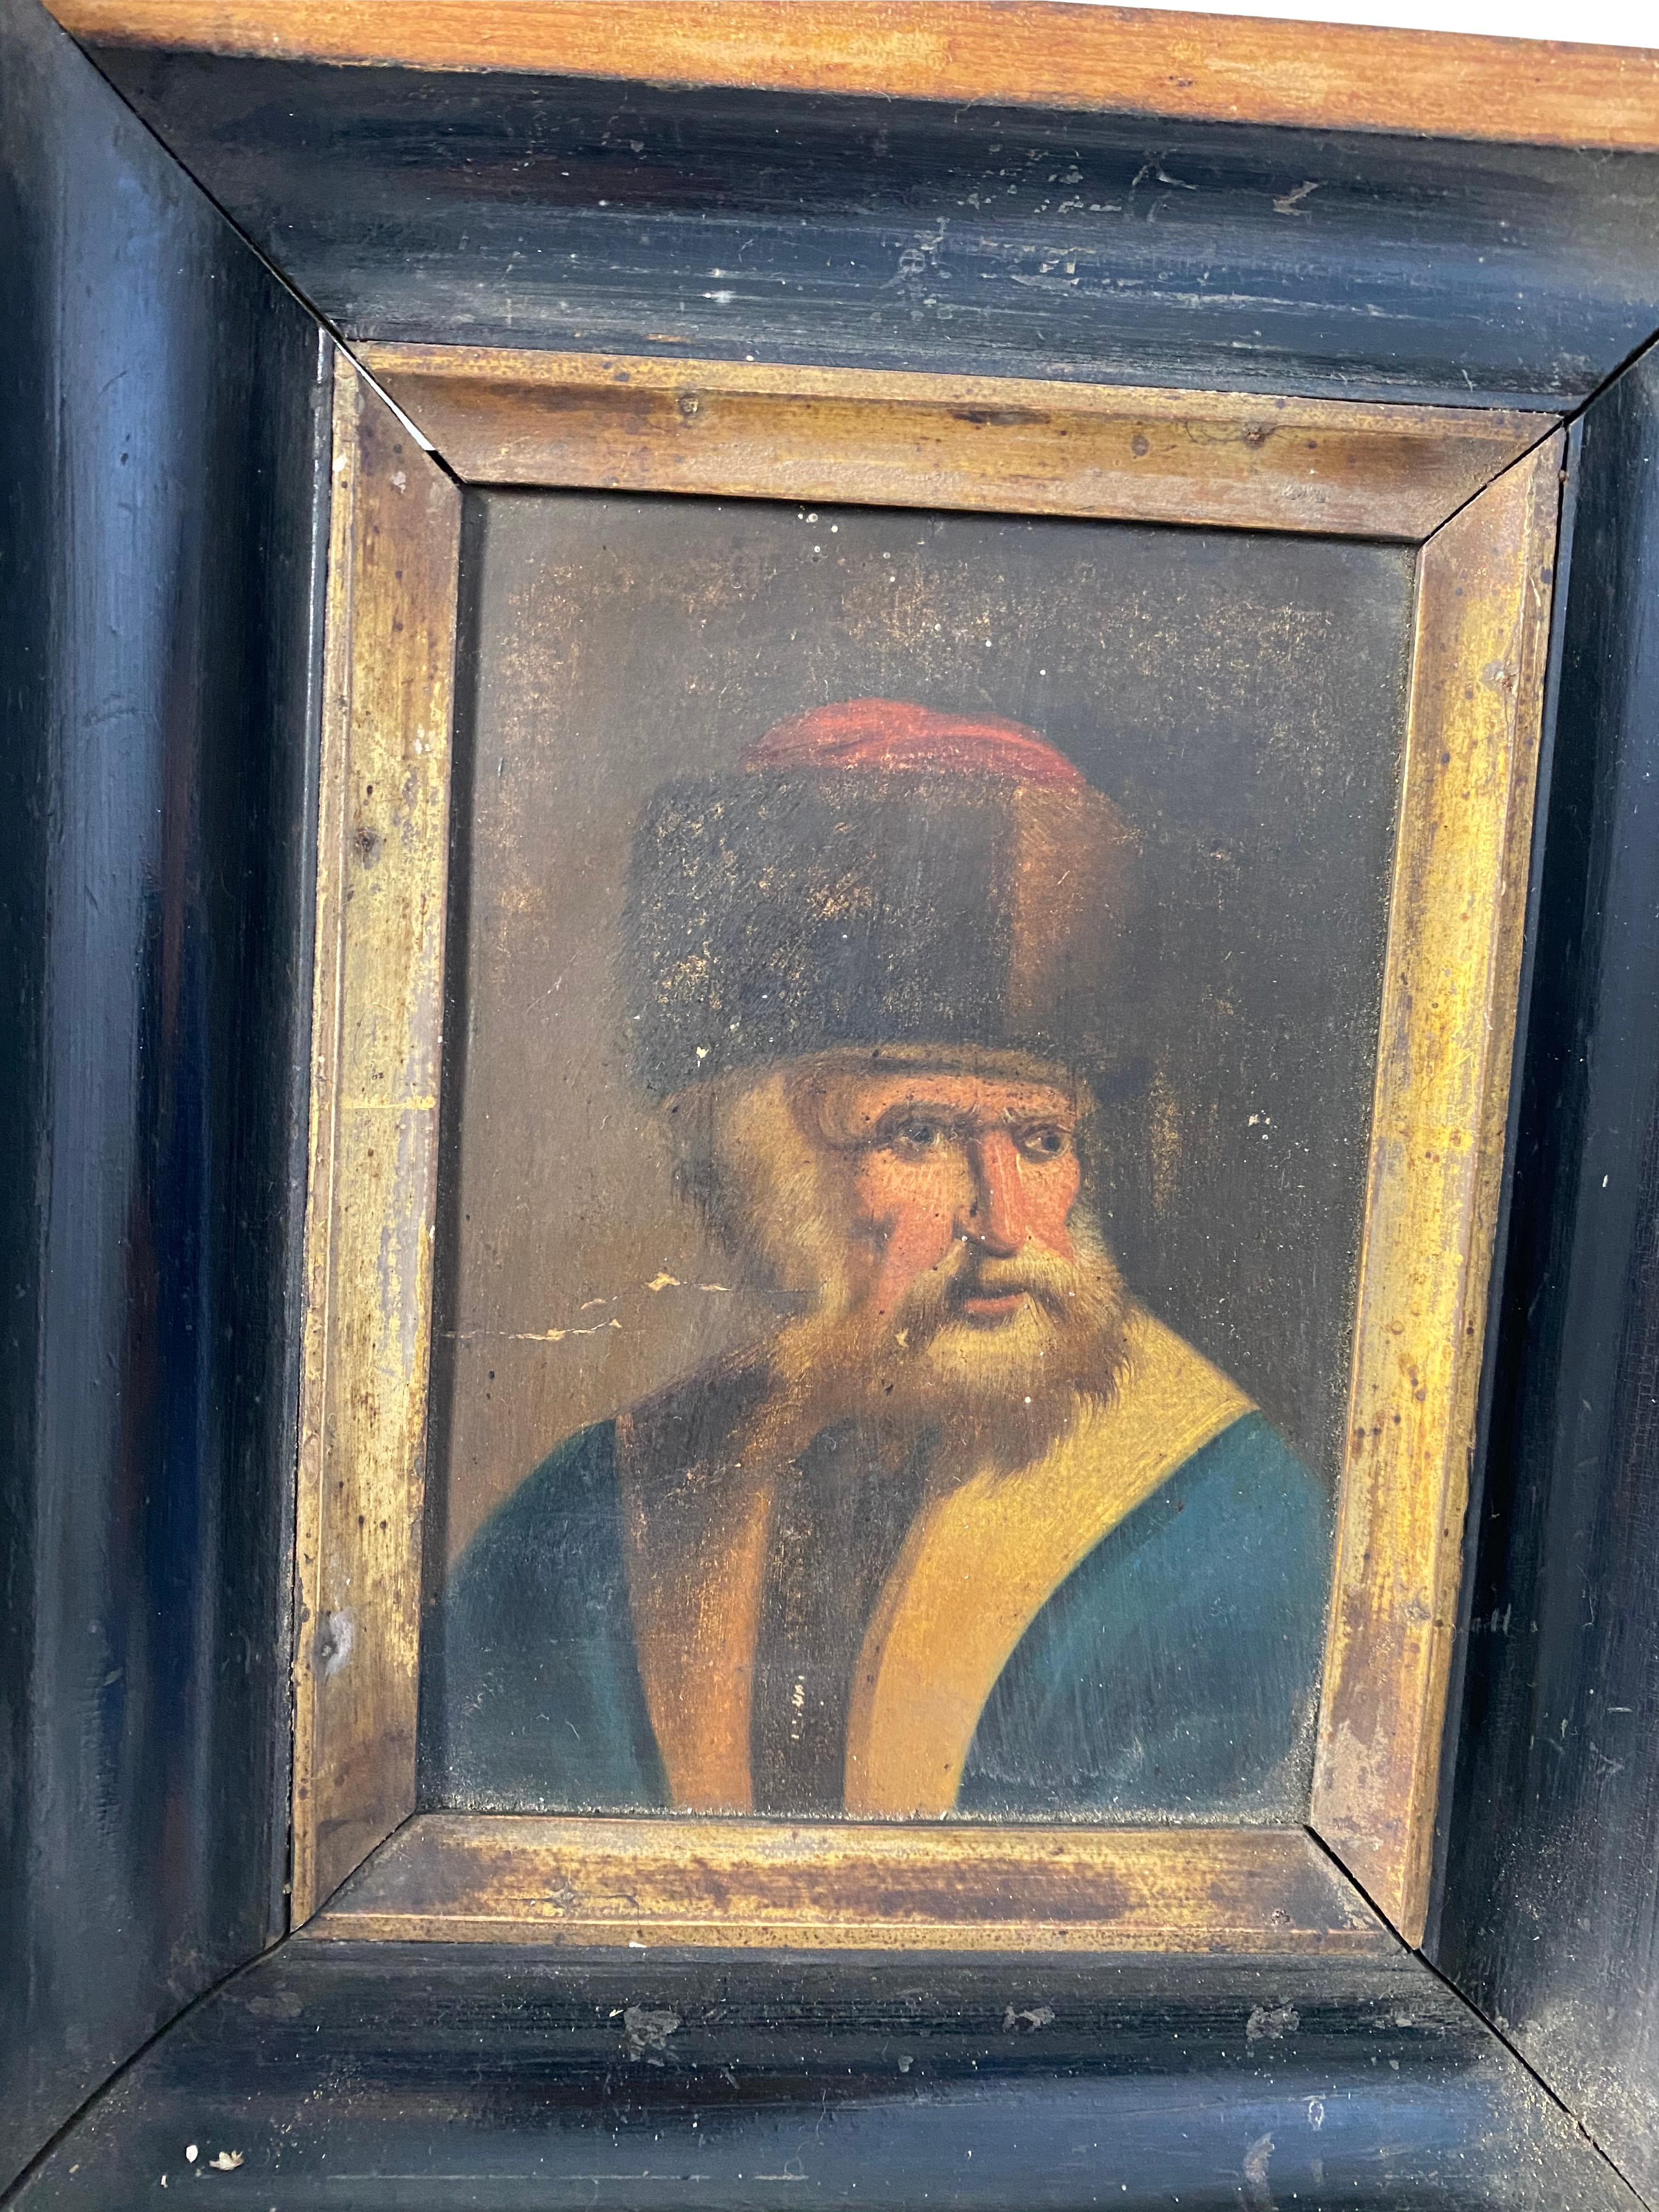 A rustic framed picture of what is likely a Rabbi posing for a portrait. There is a lighter colored wooden inner frame surrounding the picture adjacent to the darker wooden circumference frame. A great piece of history, 18th century. Unknown